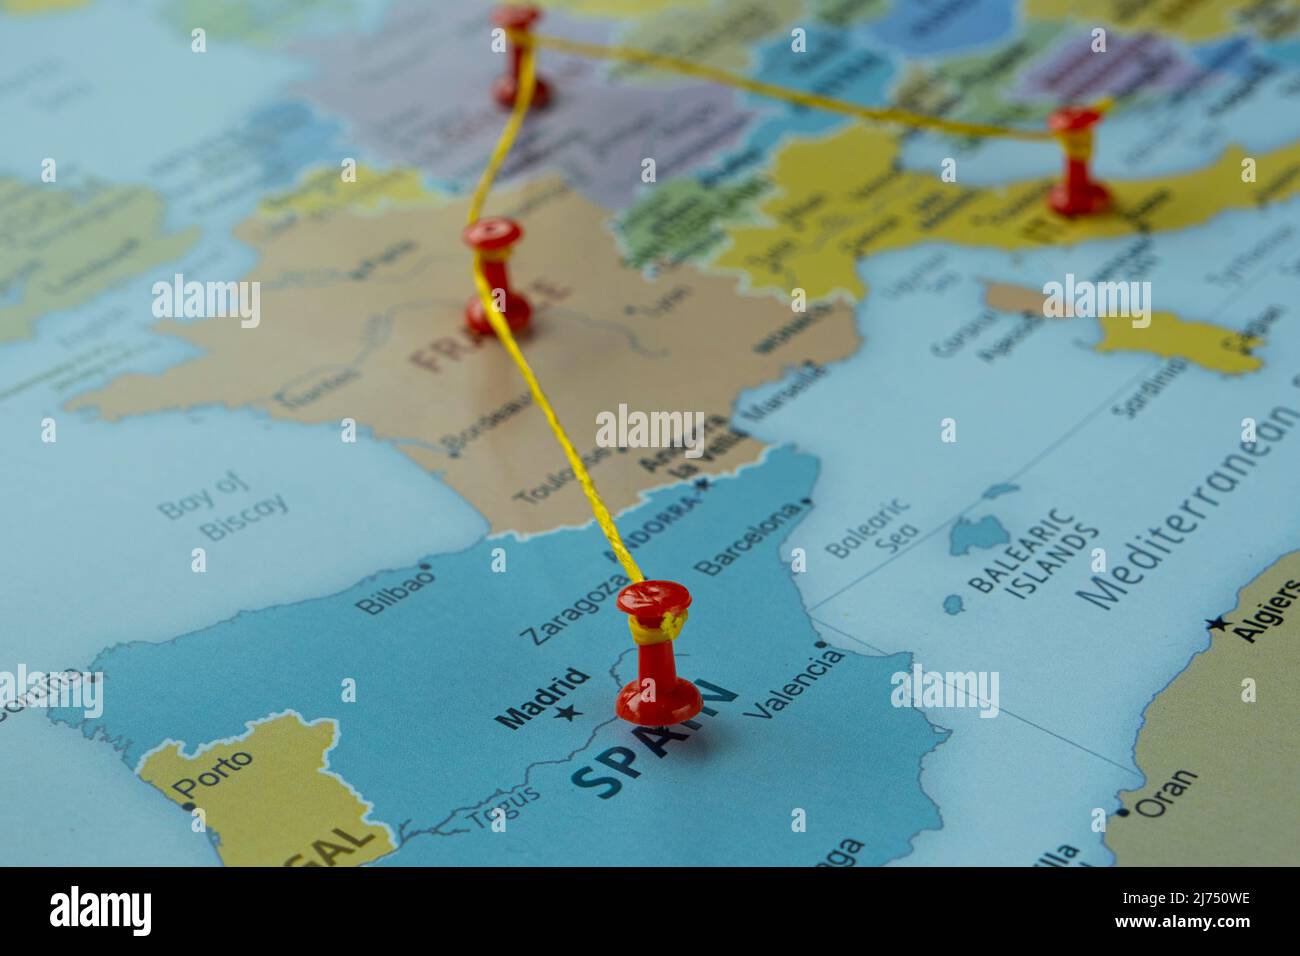 Spain Germany Italy and France on map with red fastener, Europe travel route on map with red thumbtack, travel idea, vacation and road trip concept Stock Photo